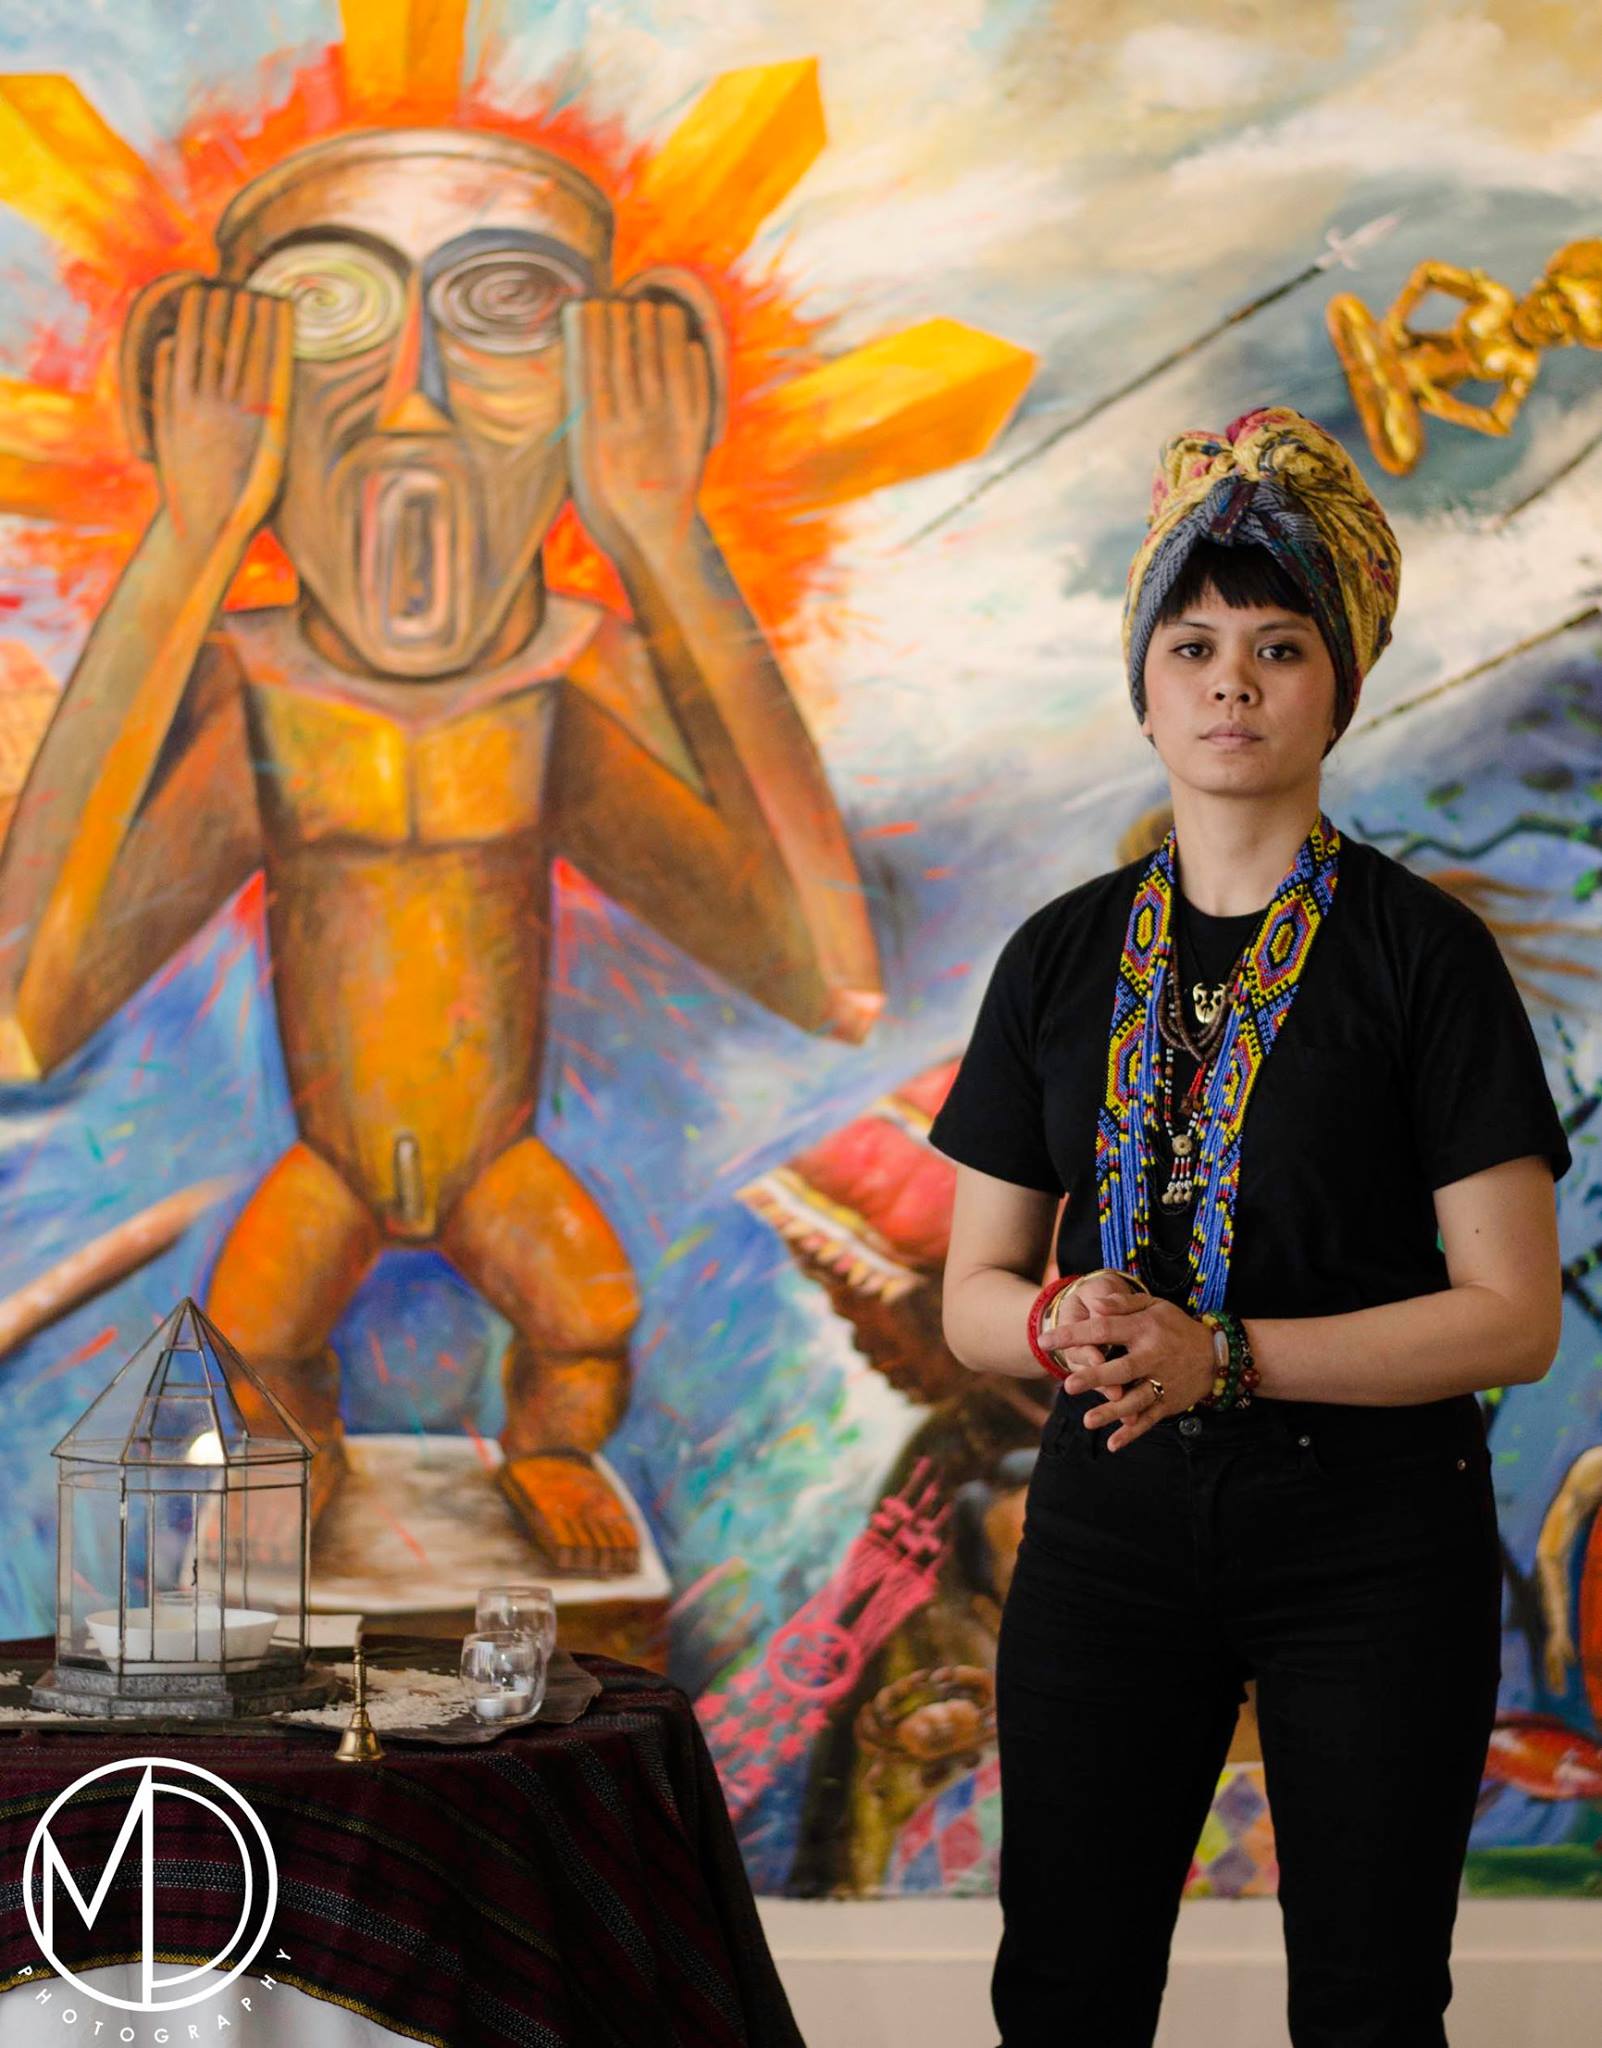 Volunteer standing next to altar for the bulol in the mural. (c) Field Museum of Natural History - CC BY-NC 4.0